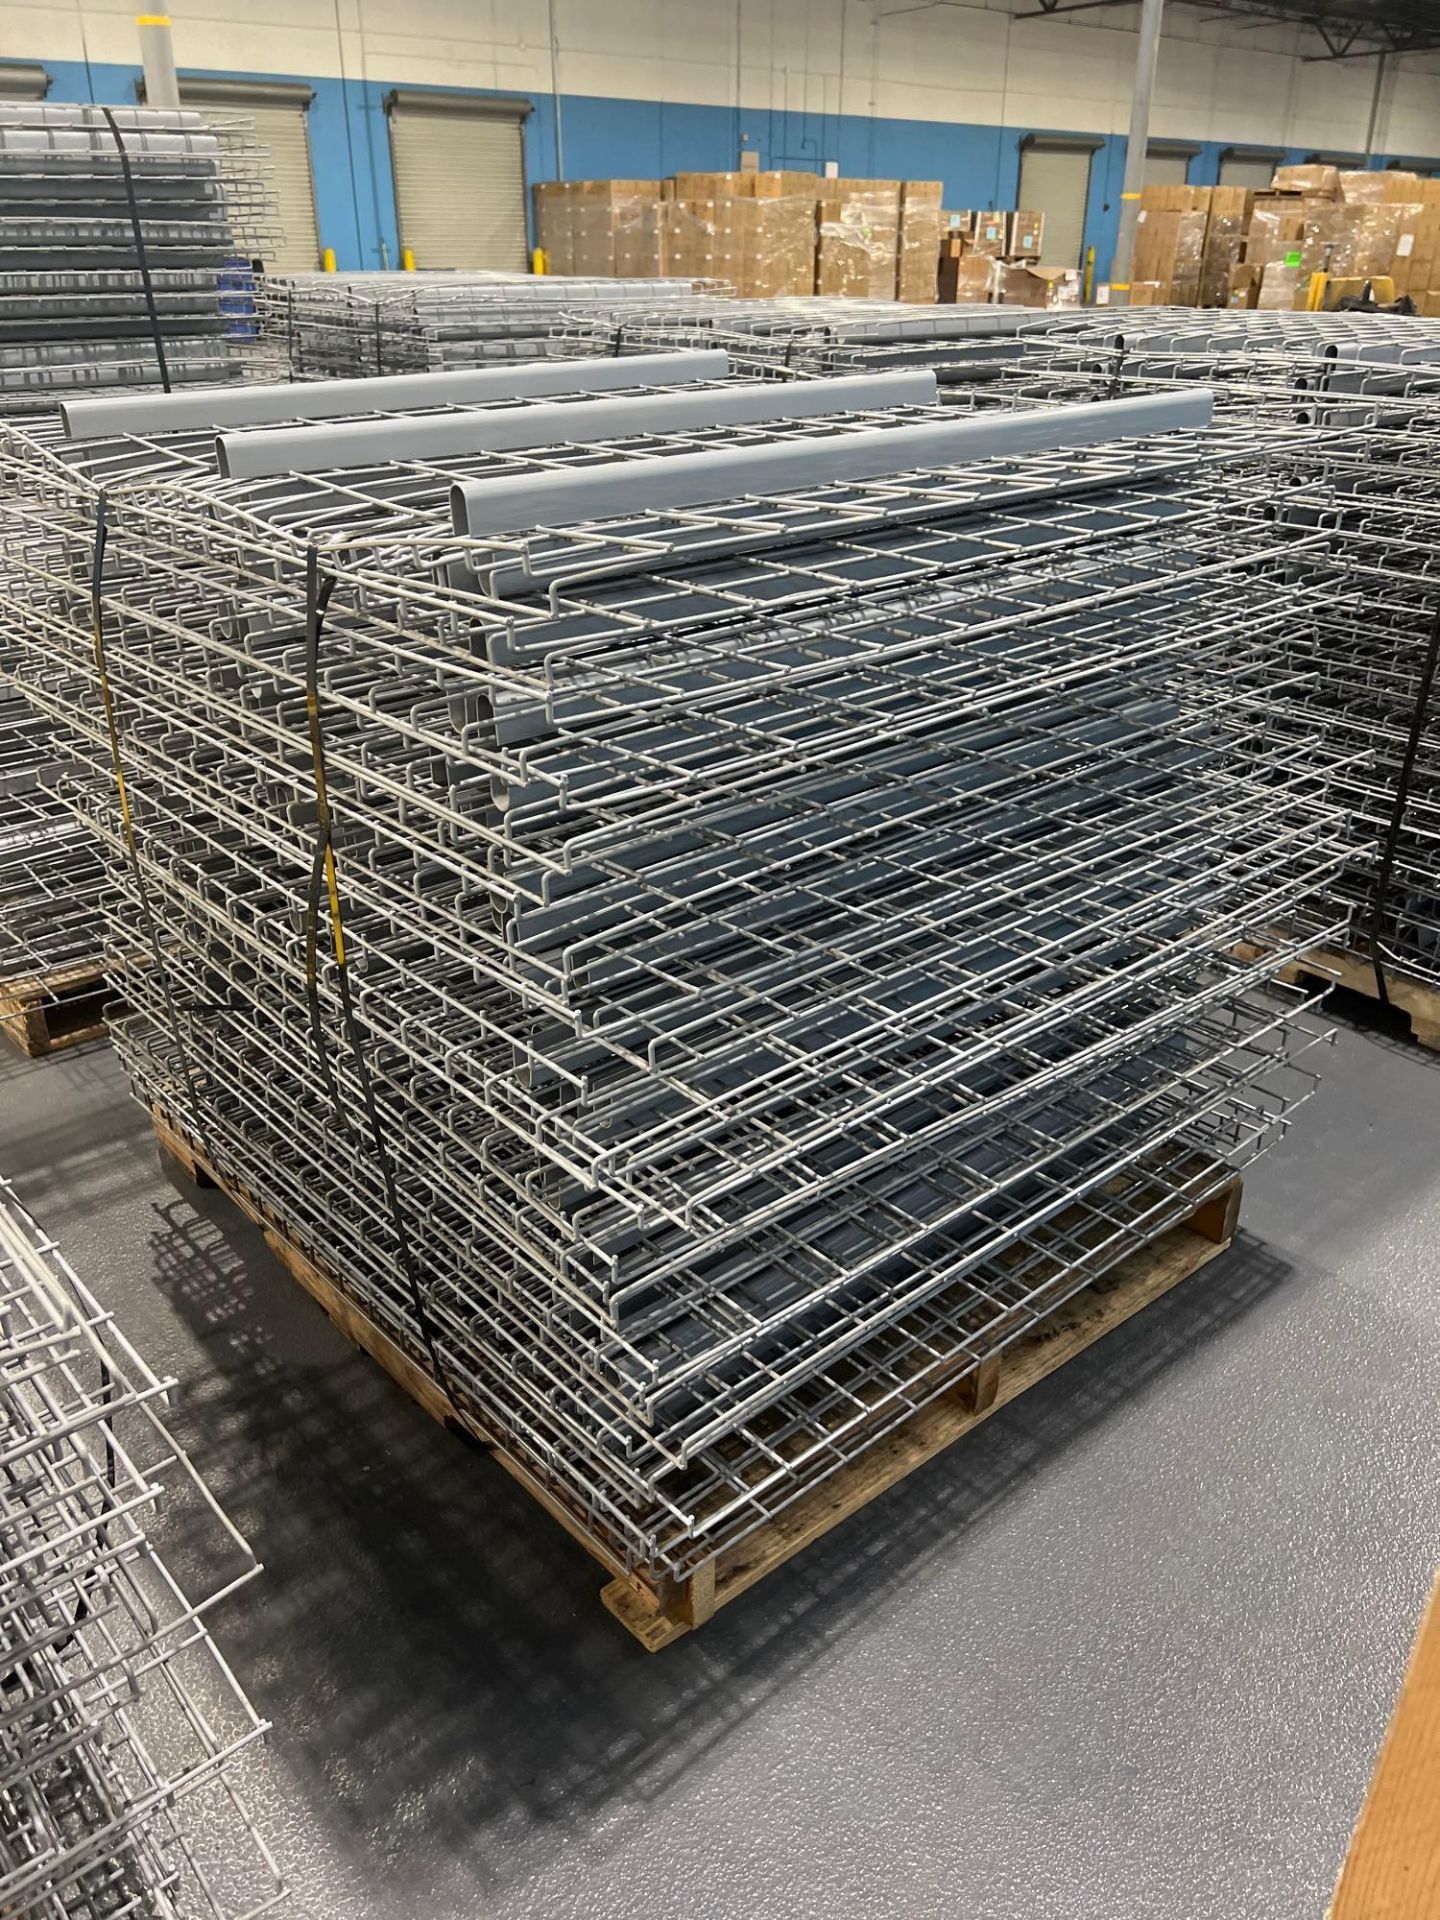 PALLET OF APPROX. 37 WIRE GRATES FOR PALLET RACKING, APPROX. DIMENSIONS 43" X 45" - Image 3 of 4